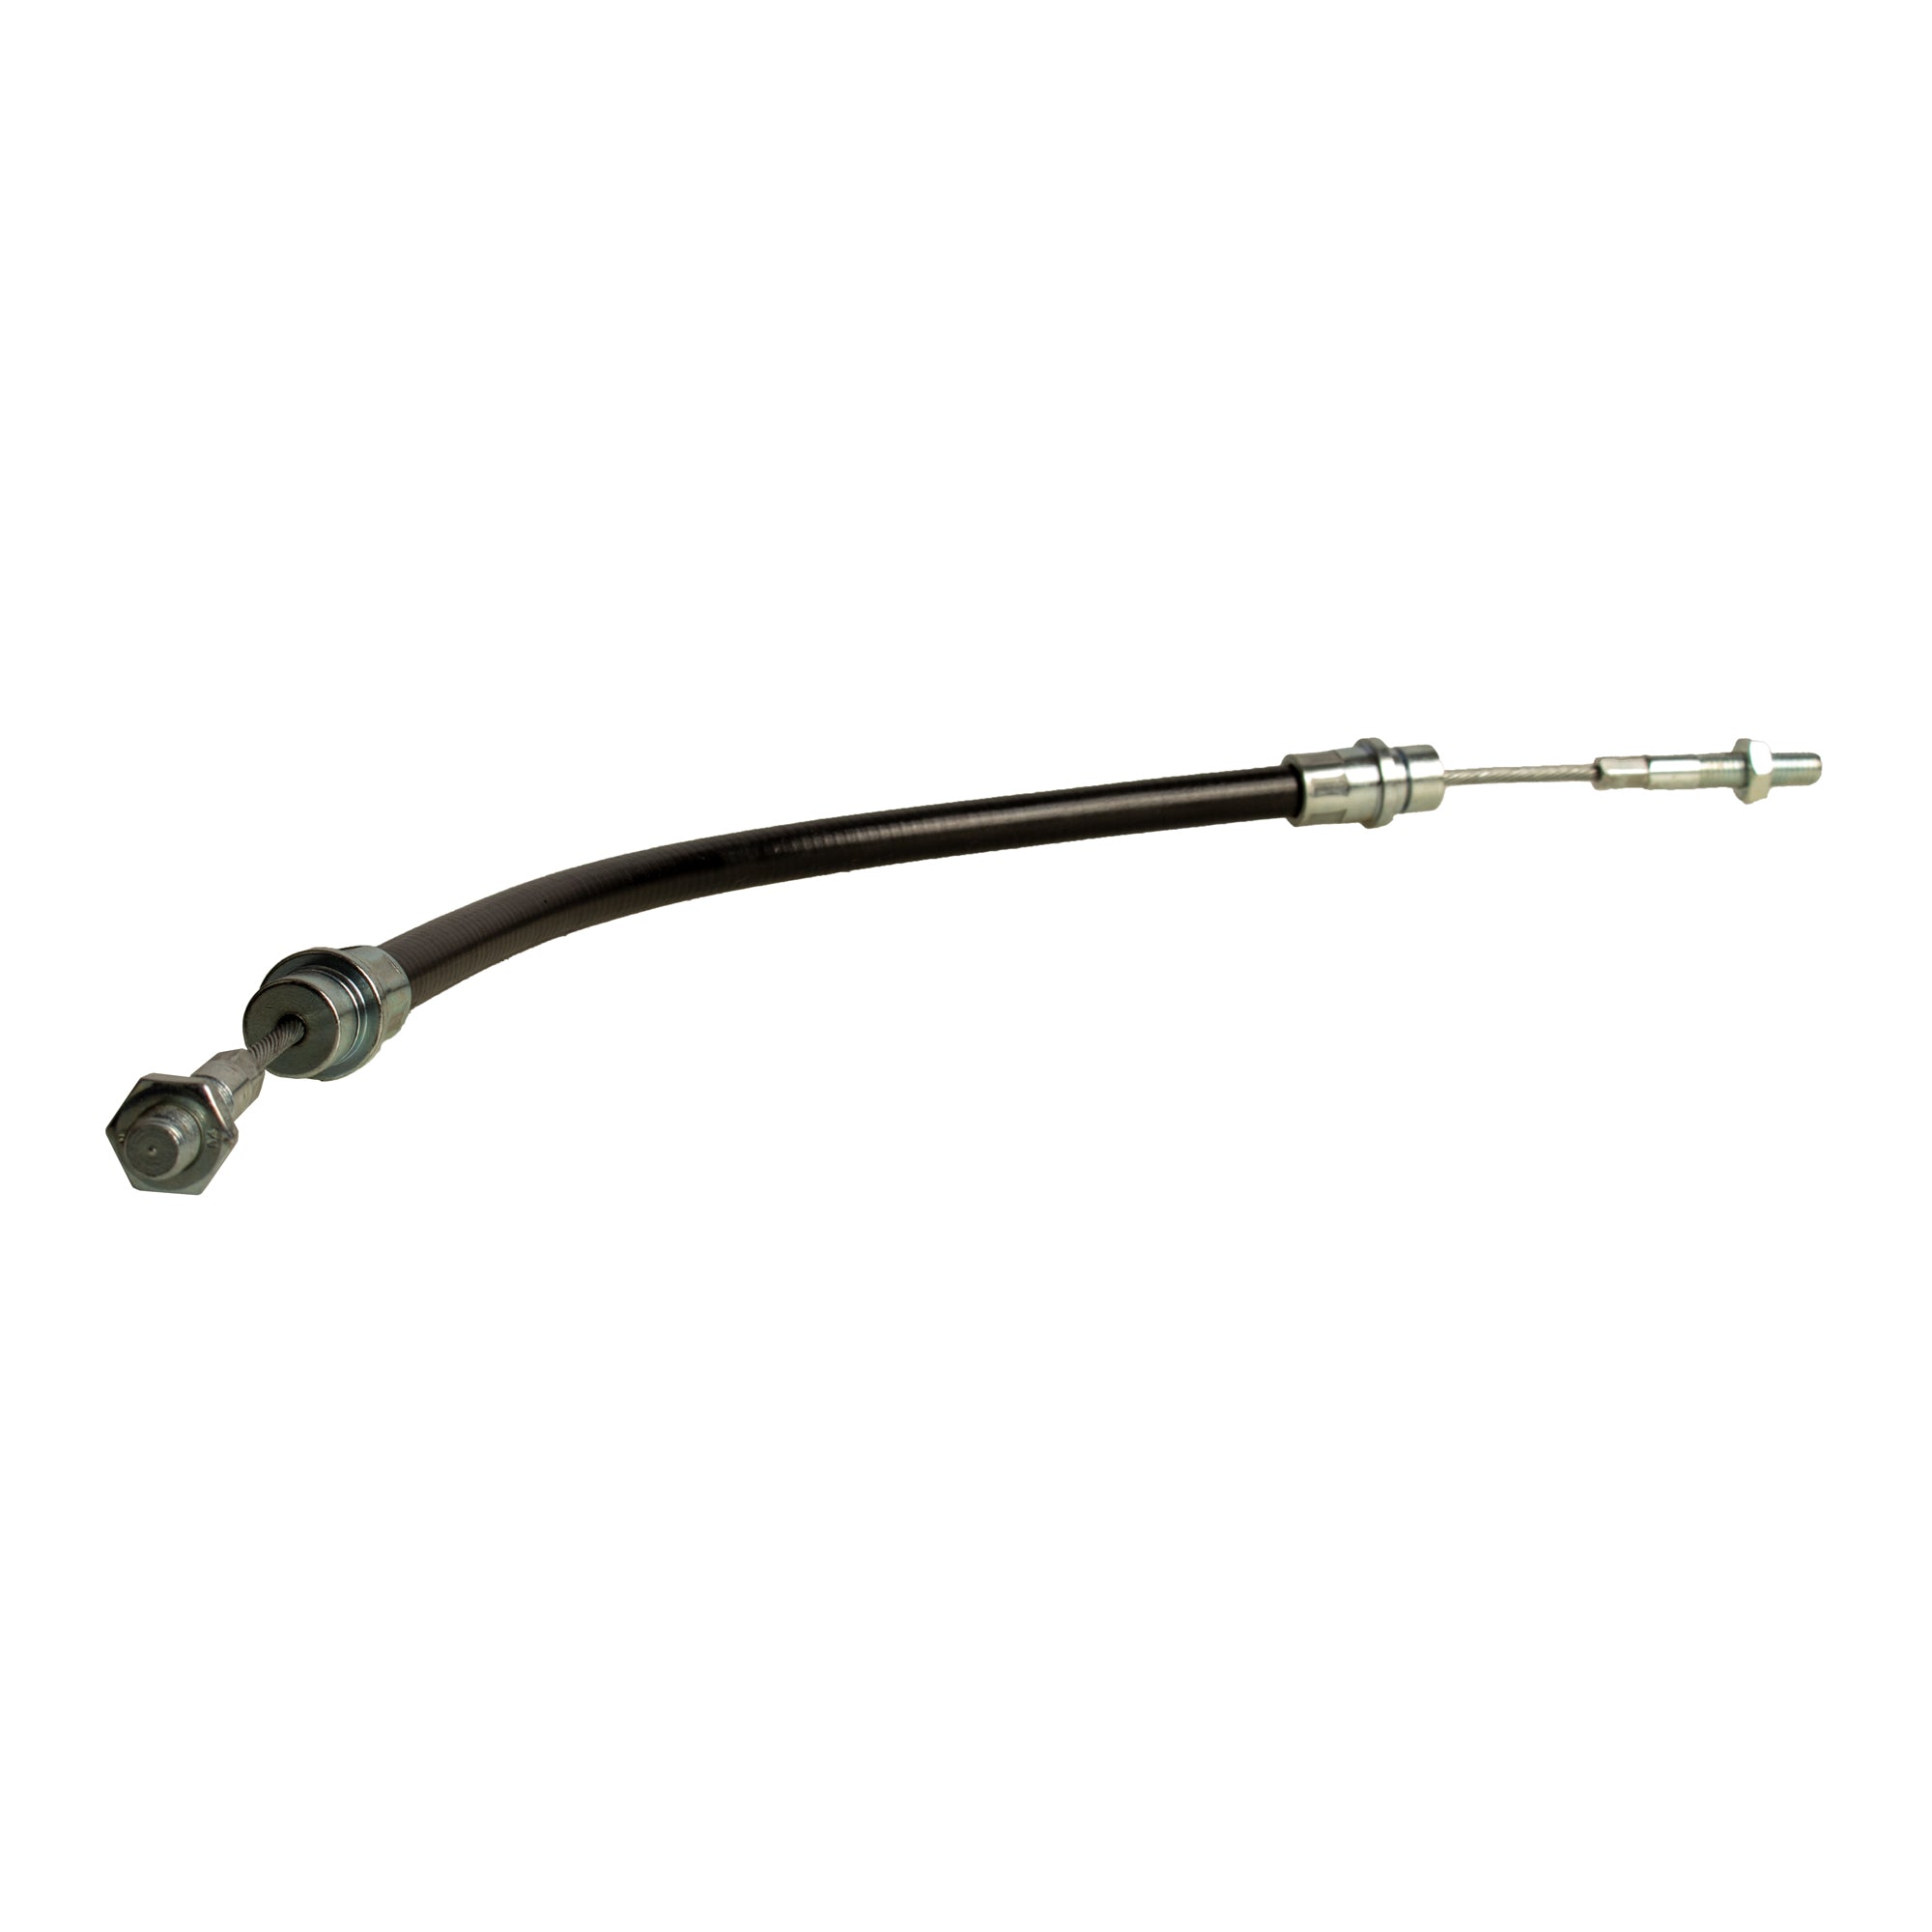 Clutch Cable Replacement for JOHN DEERE Tractor 5625 5725 5083E 5093E RE283698